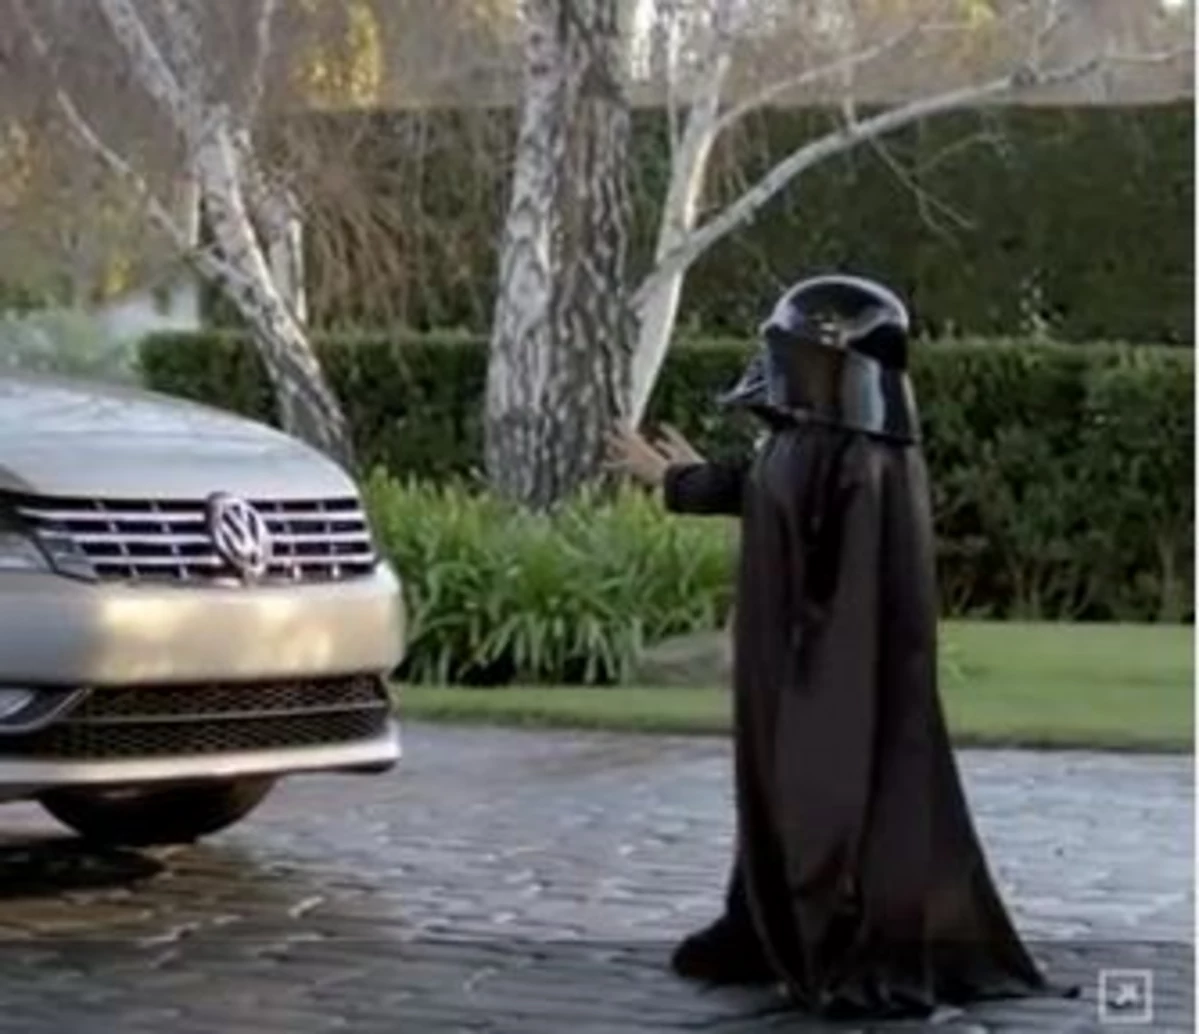 The Darth Vader Kid From the Volkswagen Super Bowl Ad Needs Open Heart